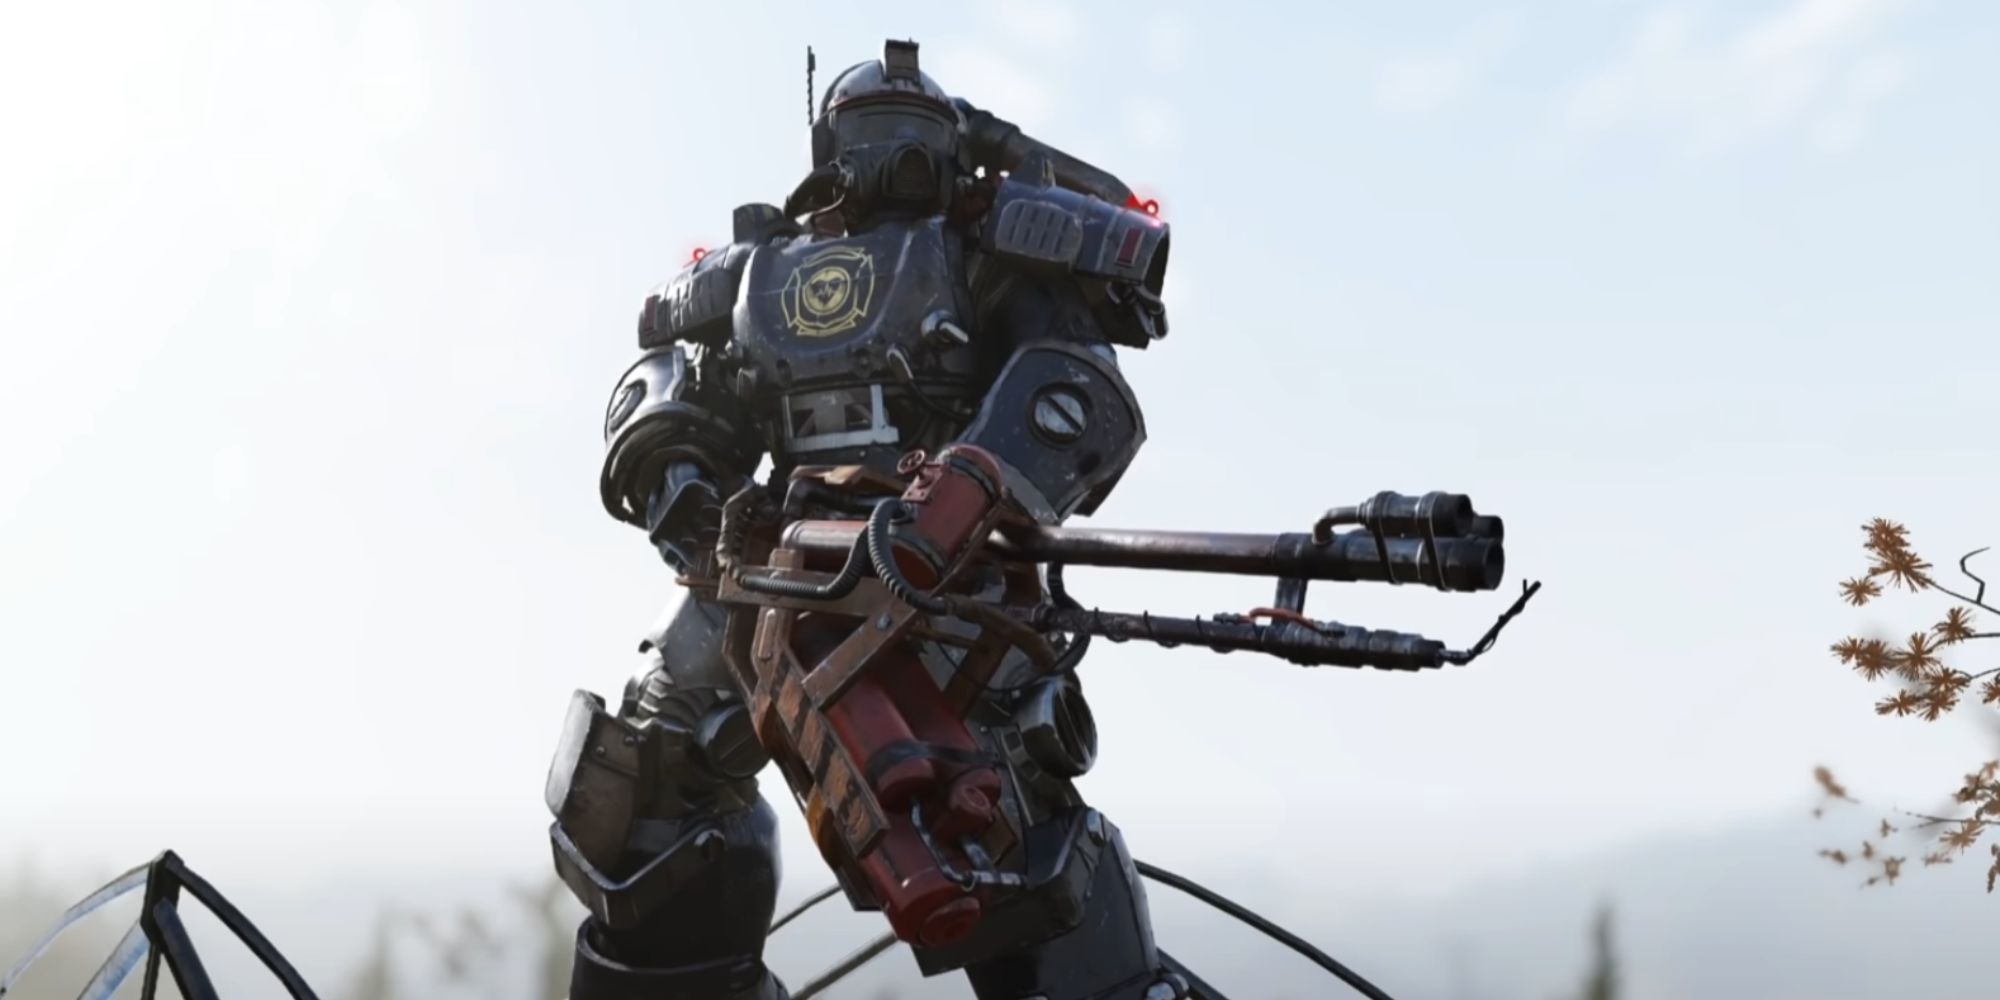 Fallout 76 Heavy Weapons Build Guide